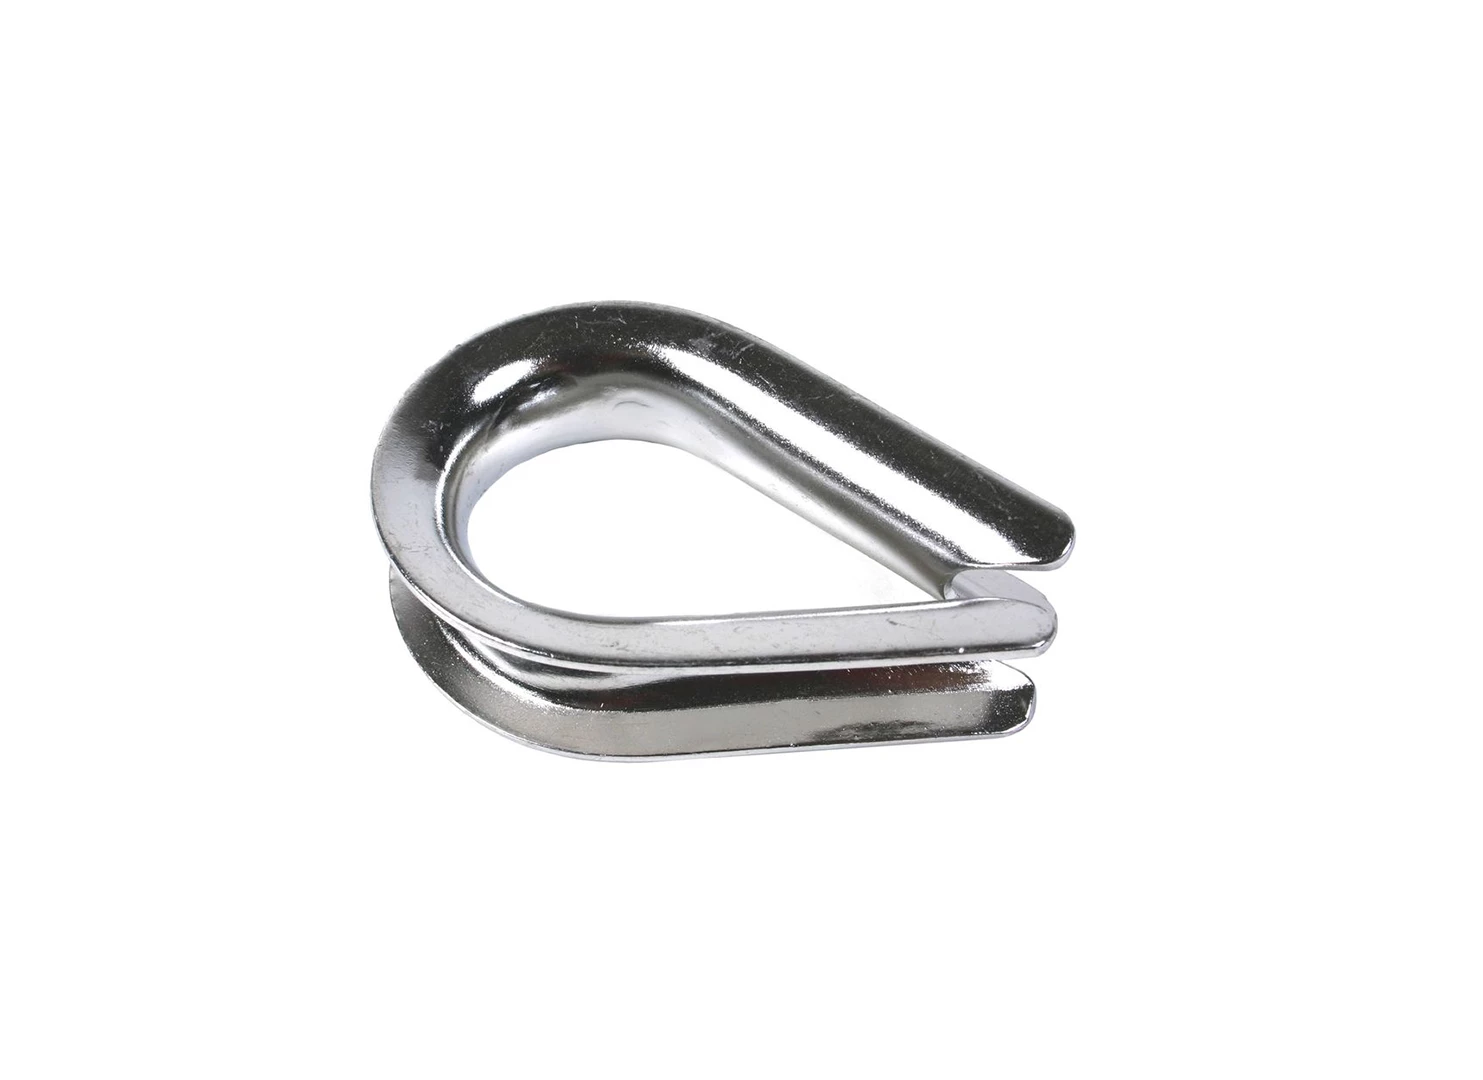 Product: Thimble 19-20mm